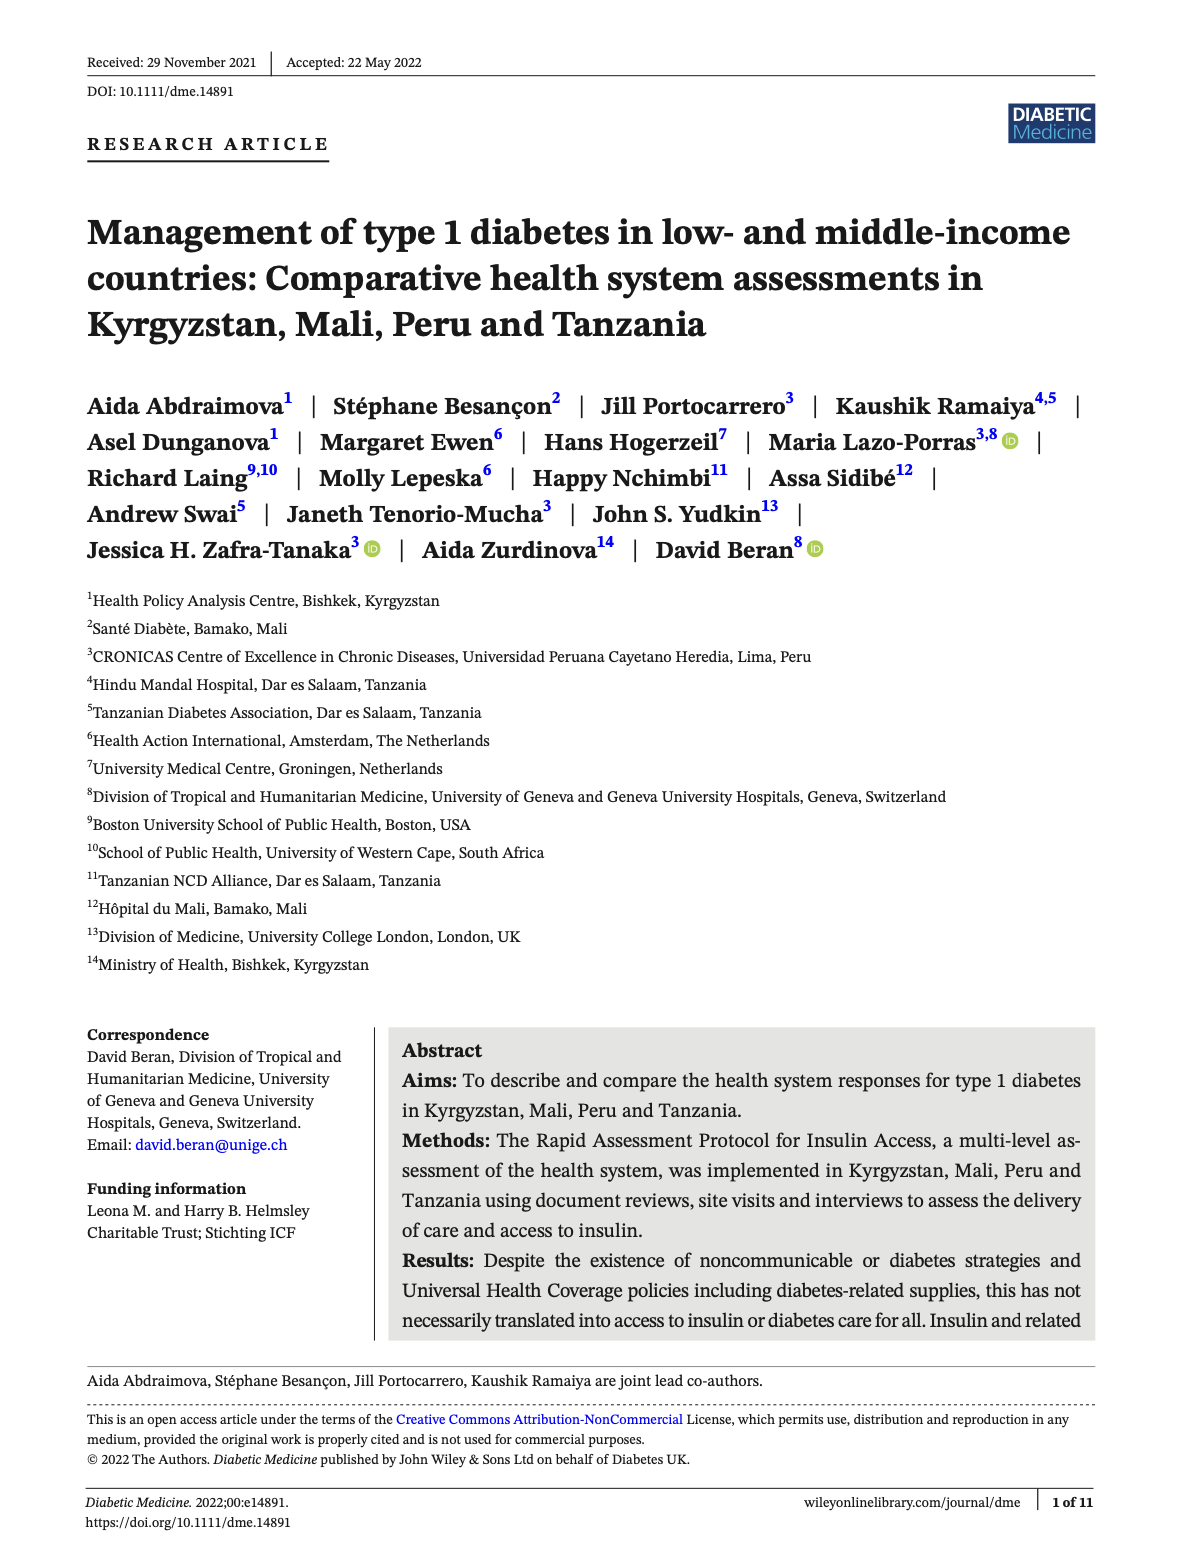 Management of type 1 diabetes in low-  and middle- income countries: Comparative health system assessments in Kyrgyzstan, Mali, Peru and Tanzania